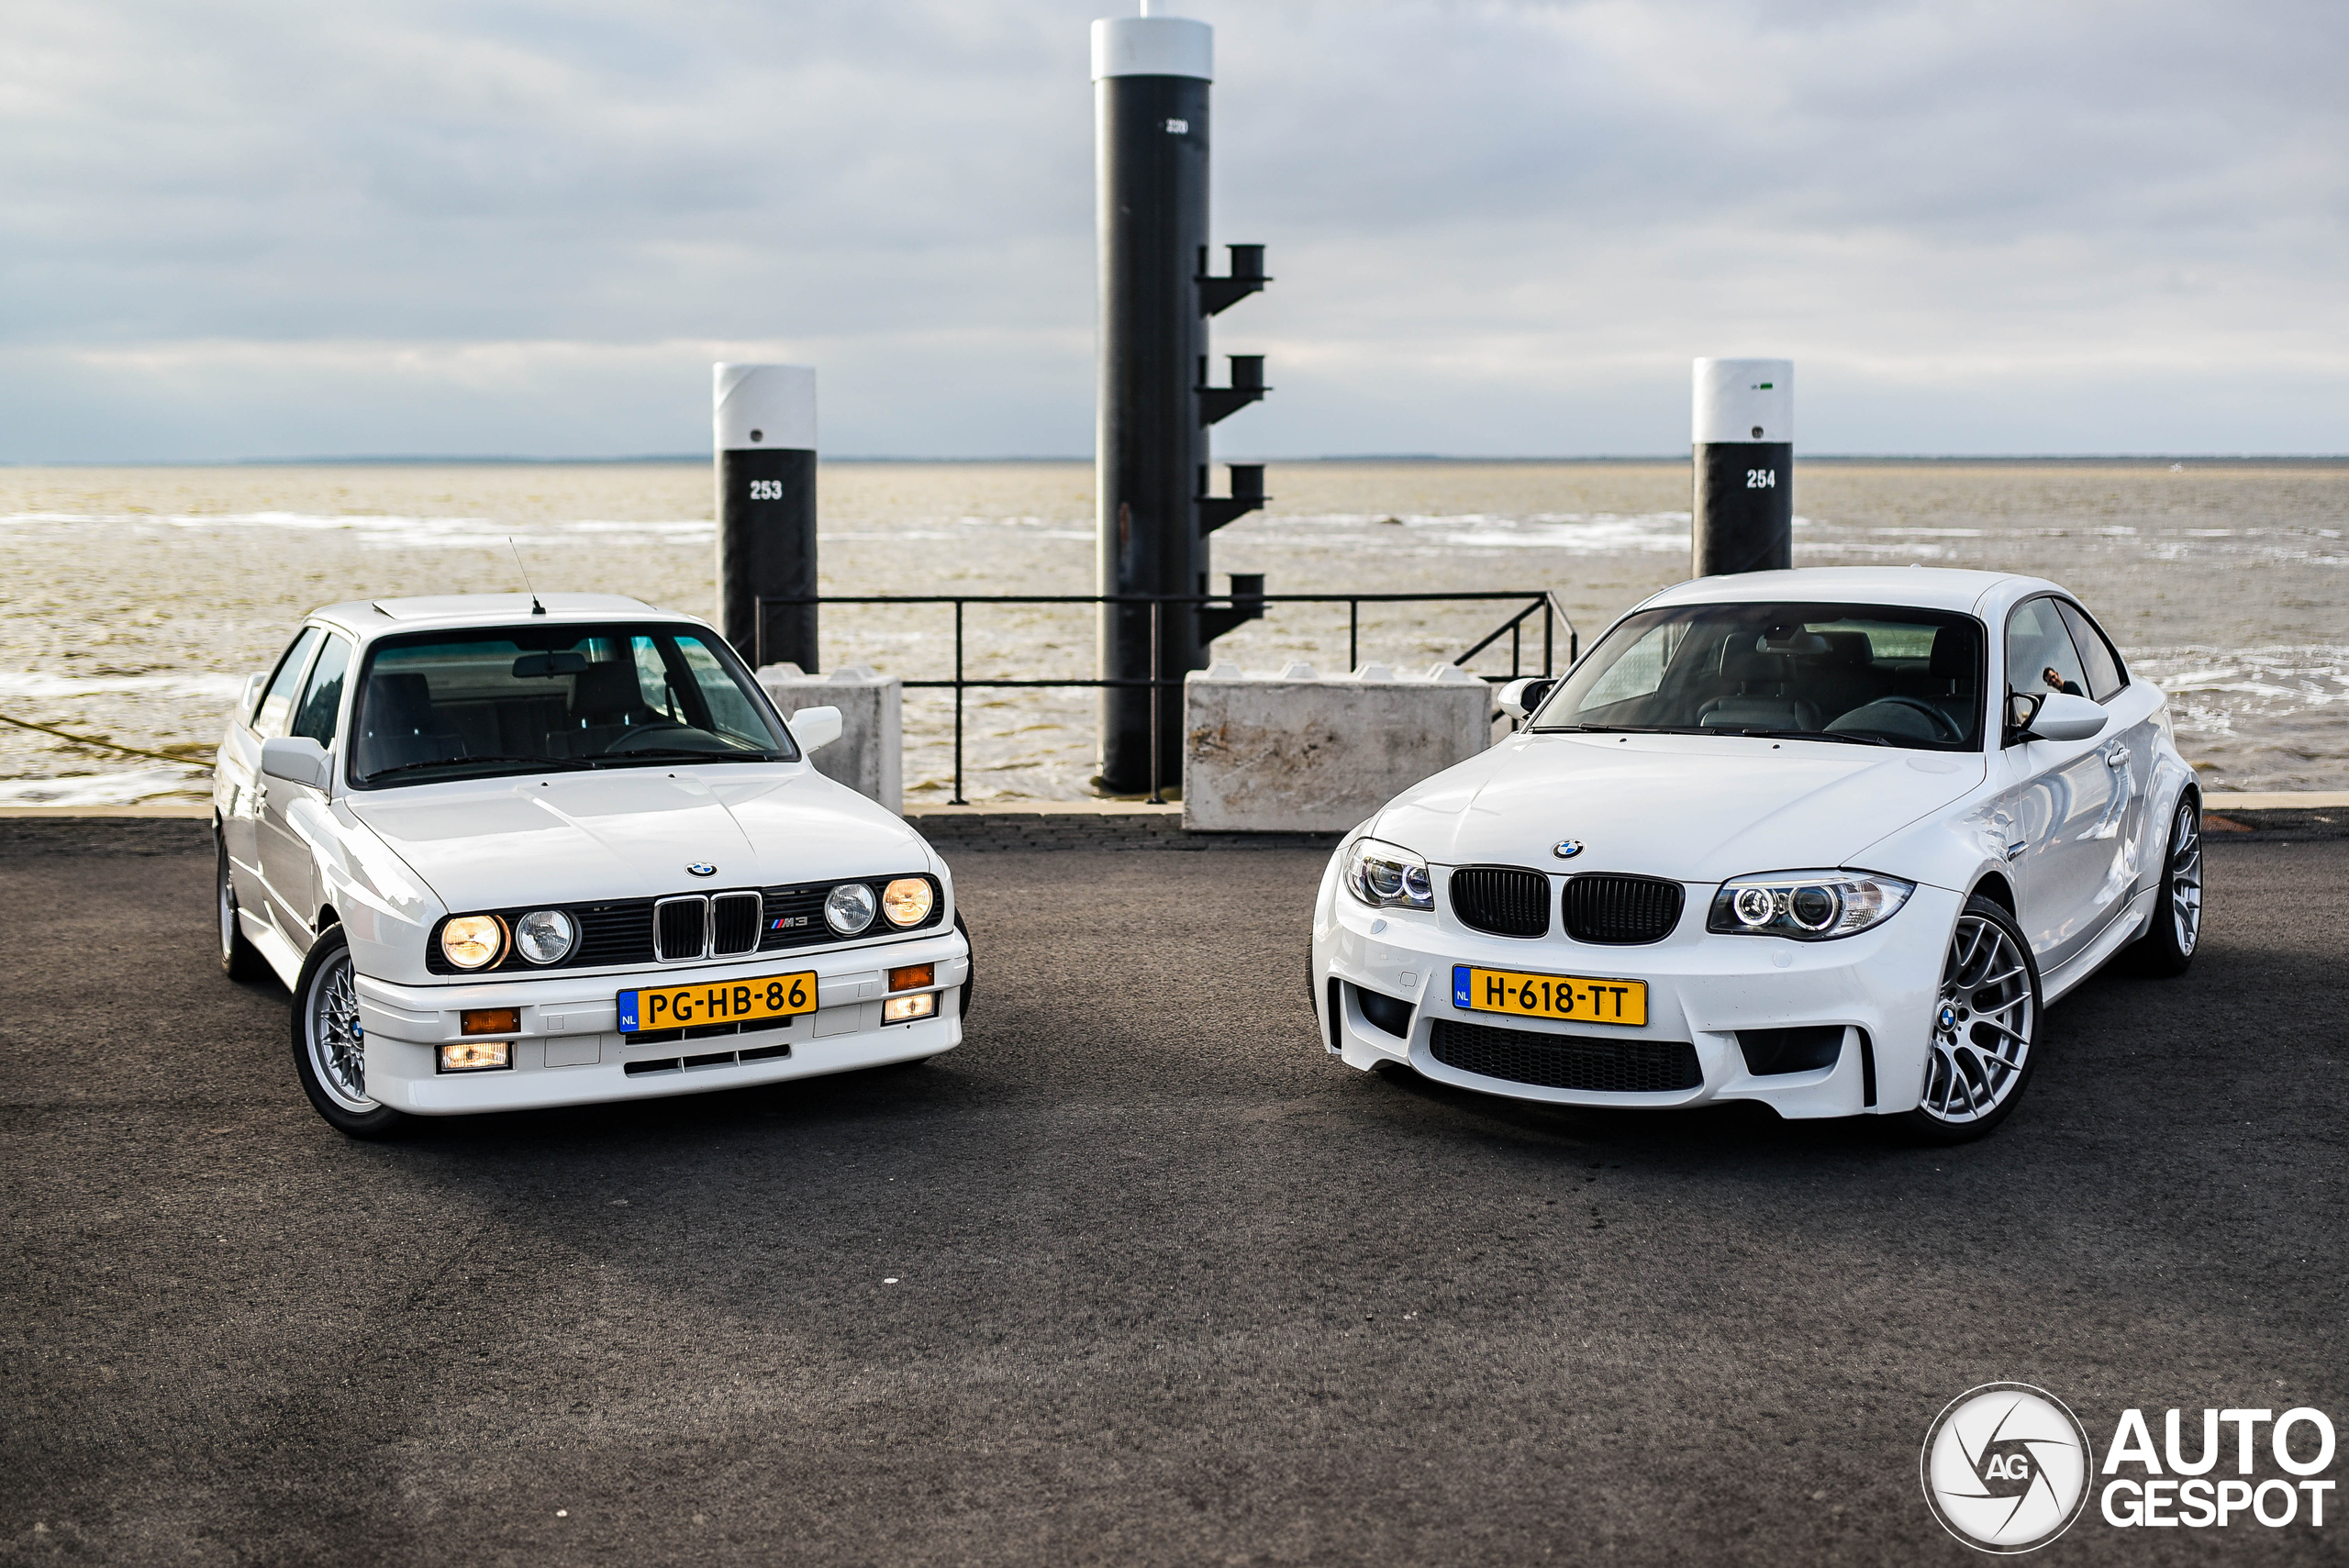 BMW legends: A tale of two M's from different eras